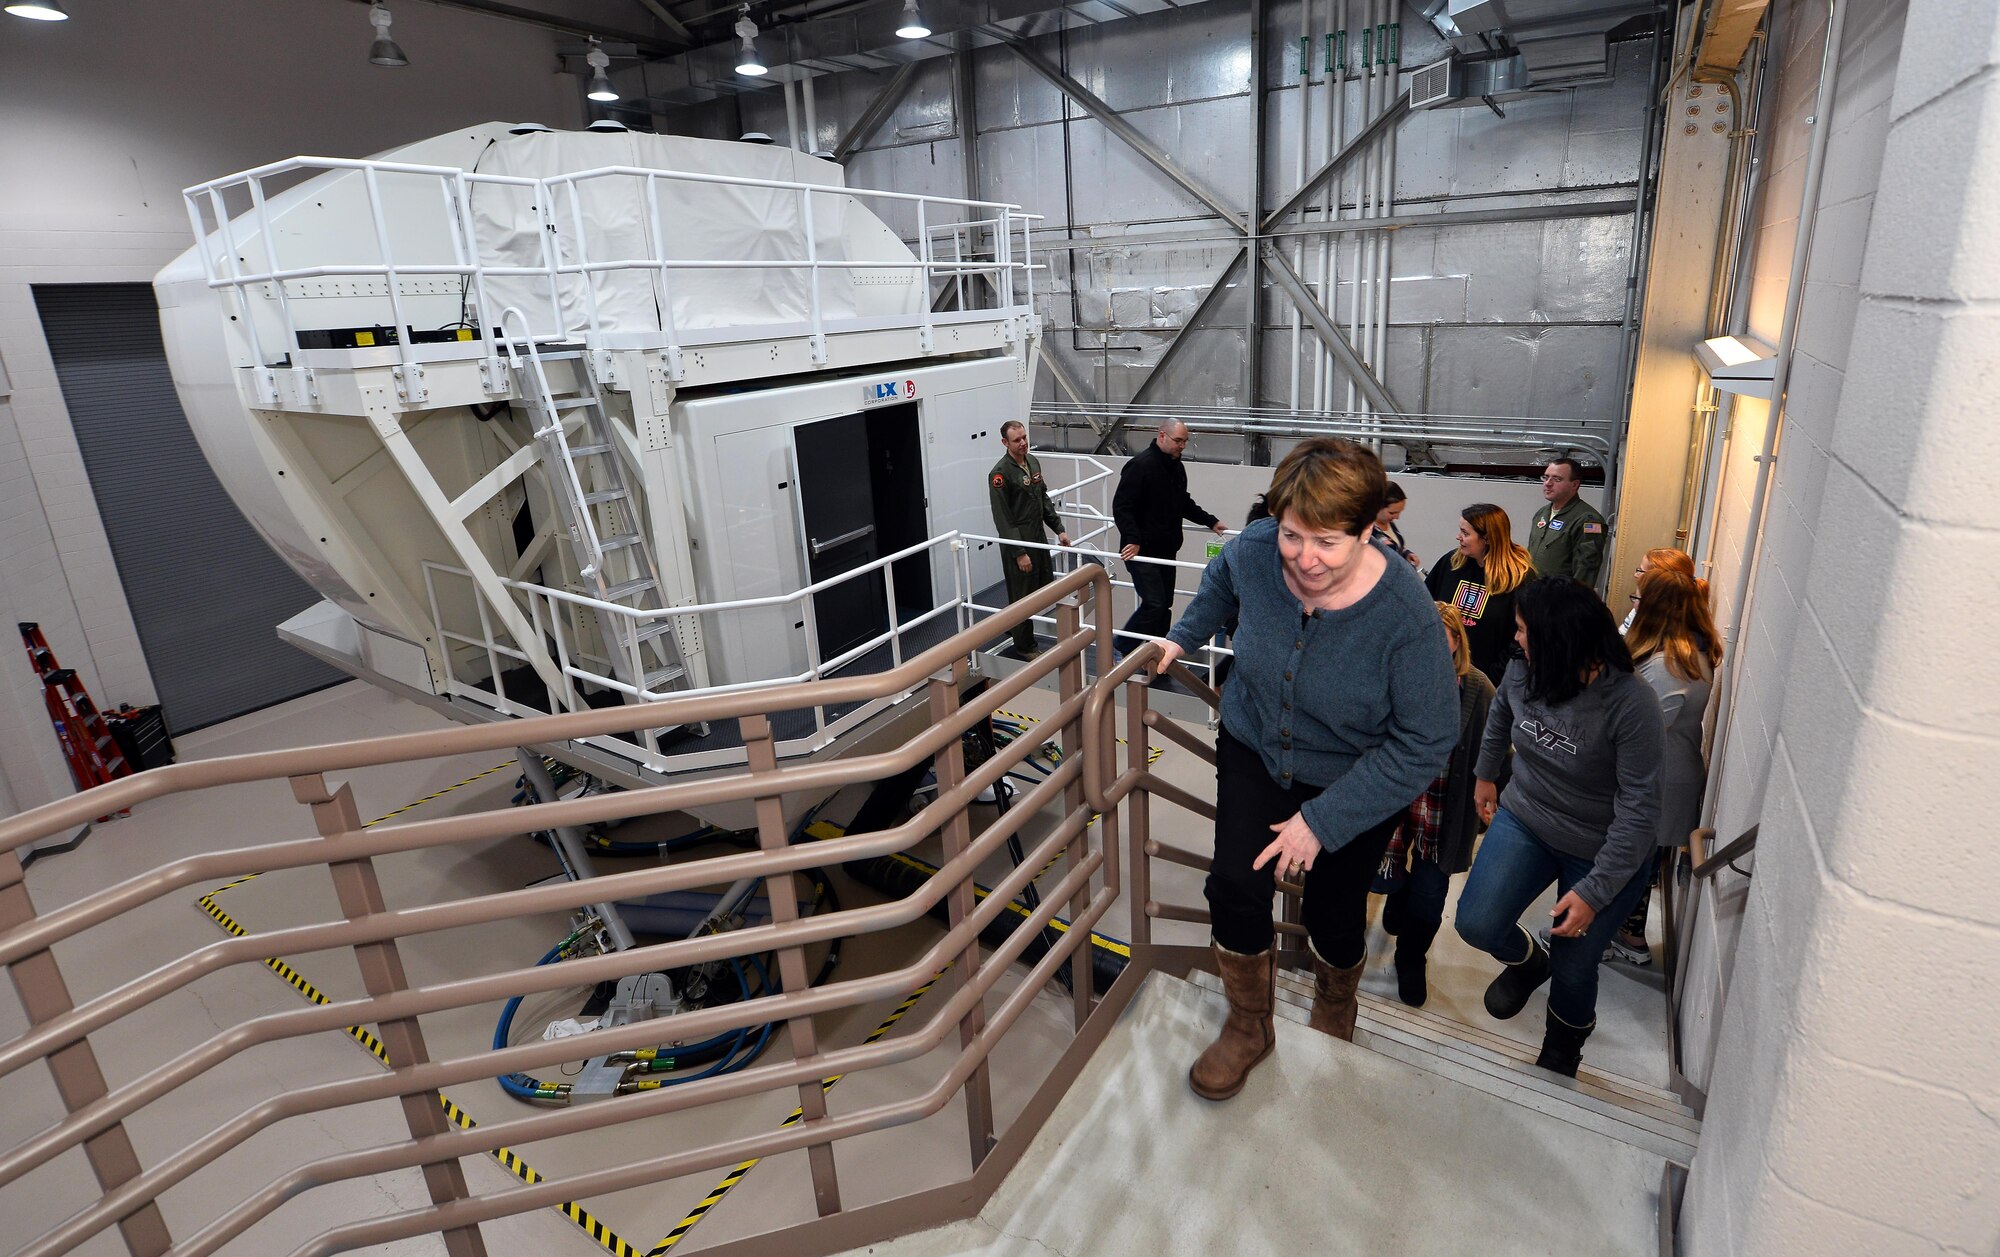 Spouses of military Airmen exit the Operational Flight Trainer simulator, as part of a Spouse Appreciation Night held Dec. 7, 2016, at Offutt Air Force Base, Neb. The OFT3 simulator provides a variety of realistic simulations to test new pilots and navigators prior to flying a real RC-135 aircraft. (U.S. Air Force photo by Josh Plueger)